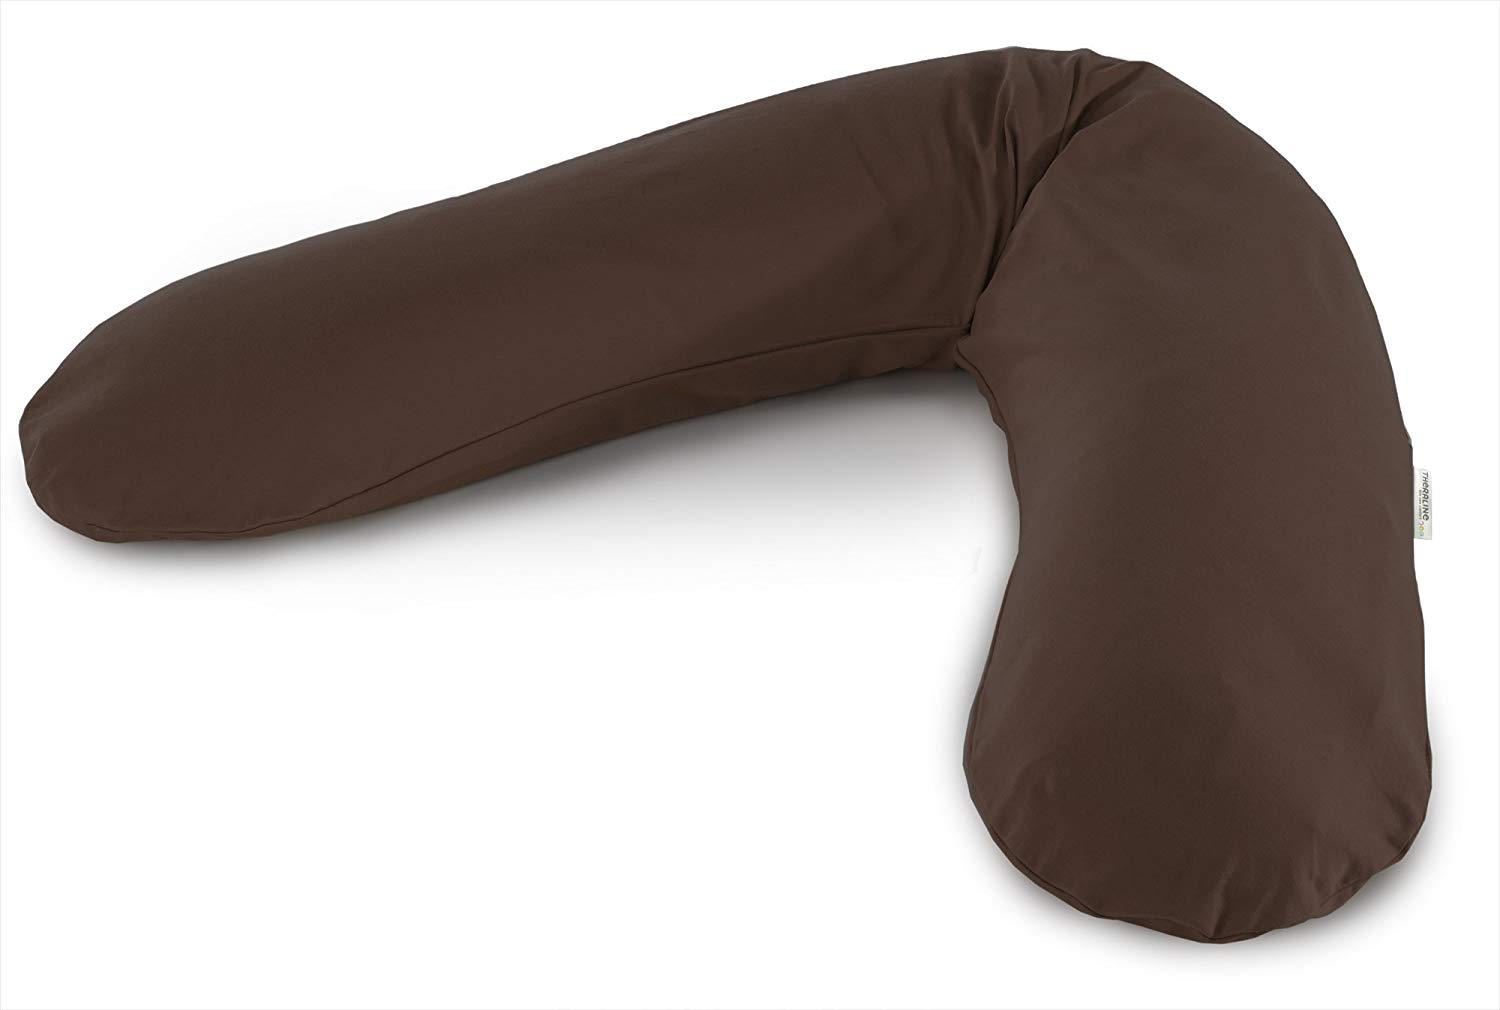 Theraline Jersey Dark Brown 51011102 Original Pillow with Cover, 190 cm